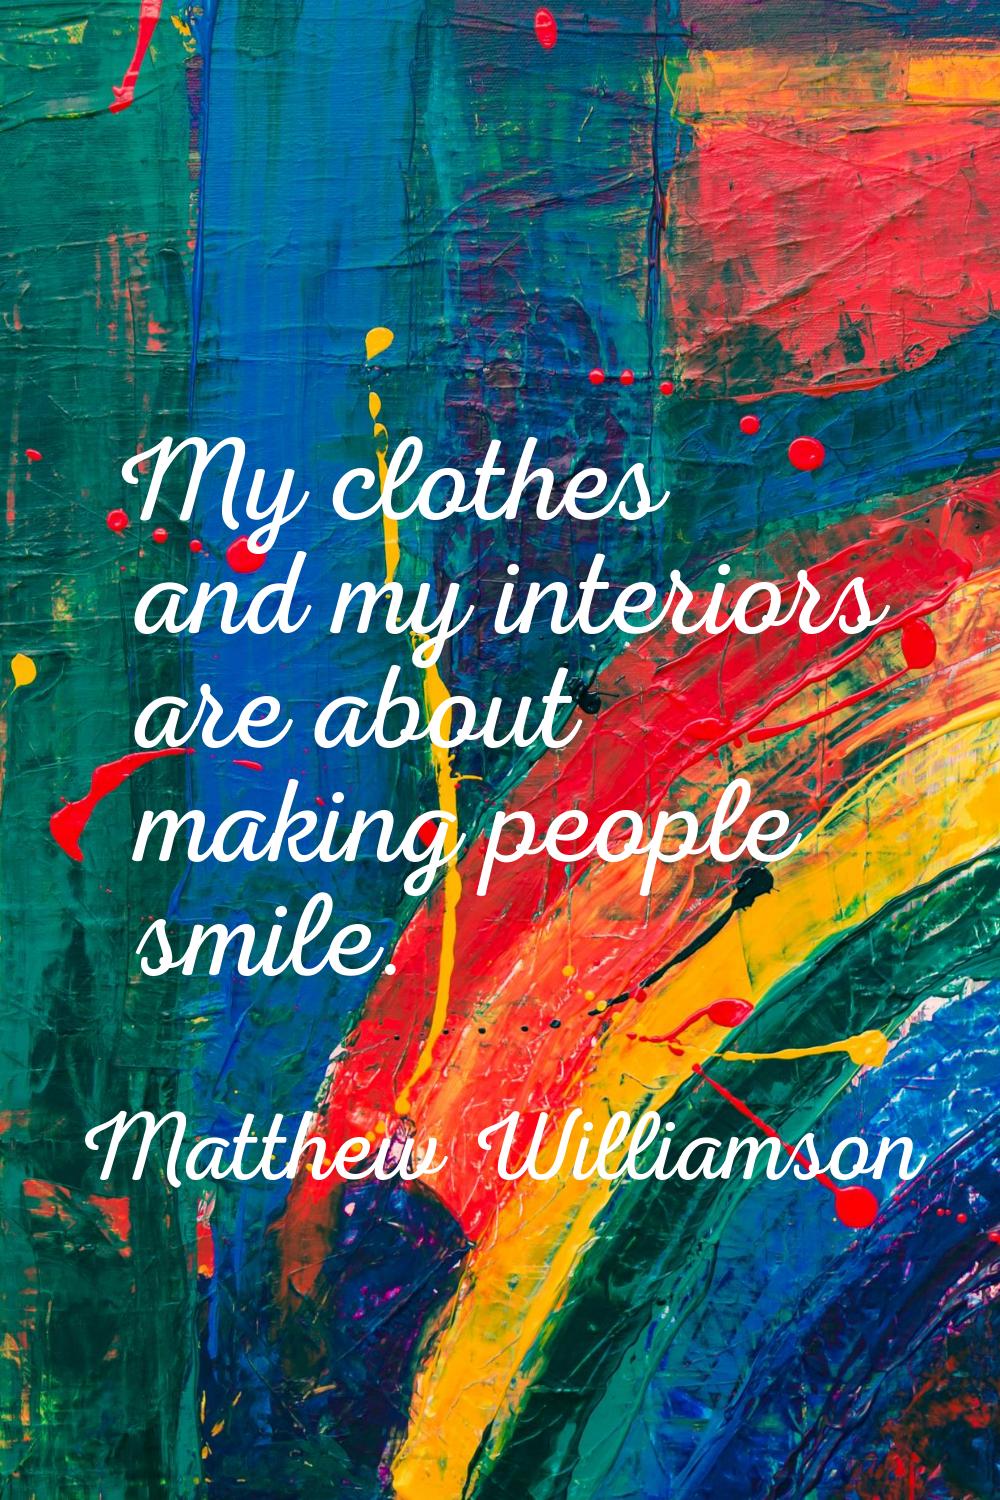 My clothes and my interiors are about making people smile.